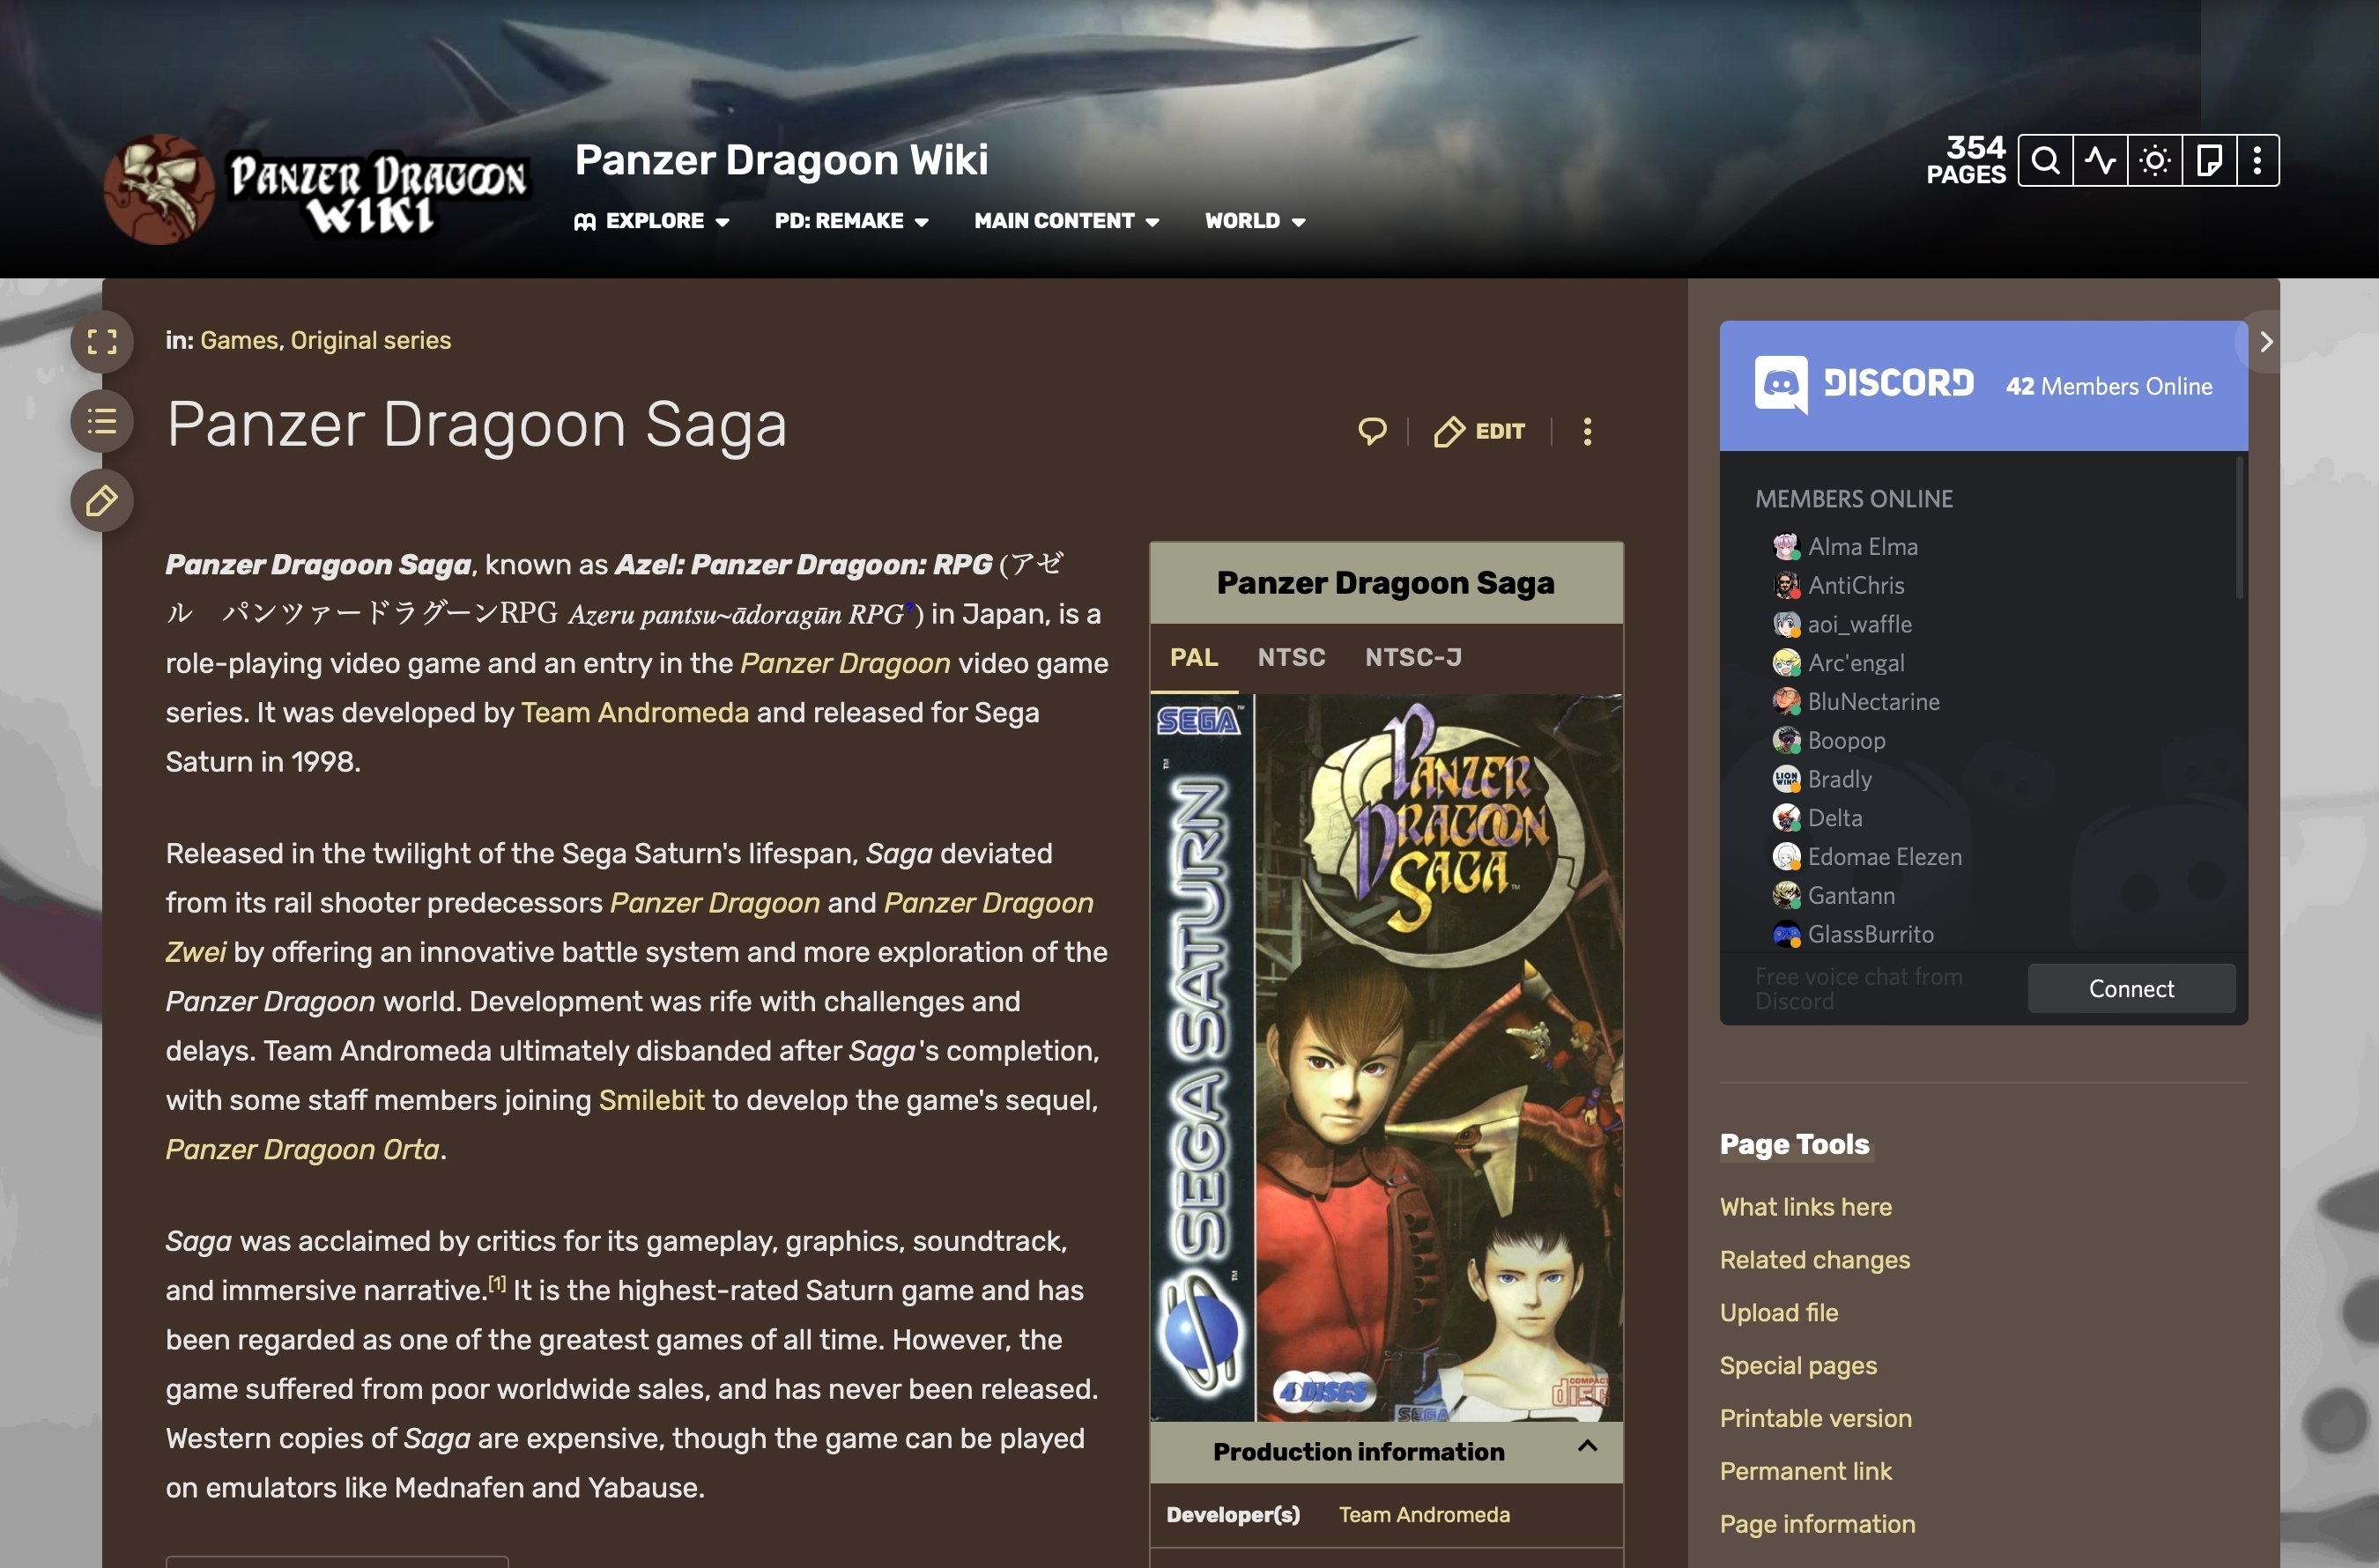 Panzer Dragoon Wiki, with an embedded list of users from the Discord server. Much communication and collaboration in the community now happens away from Panzer Dragoon Legacy's website.